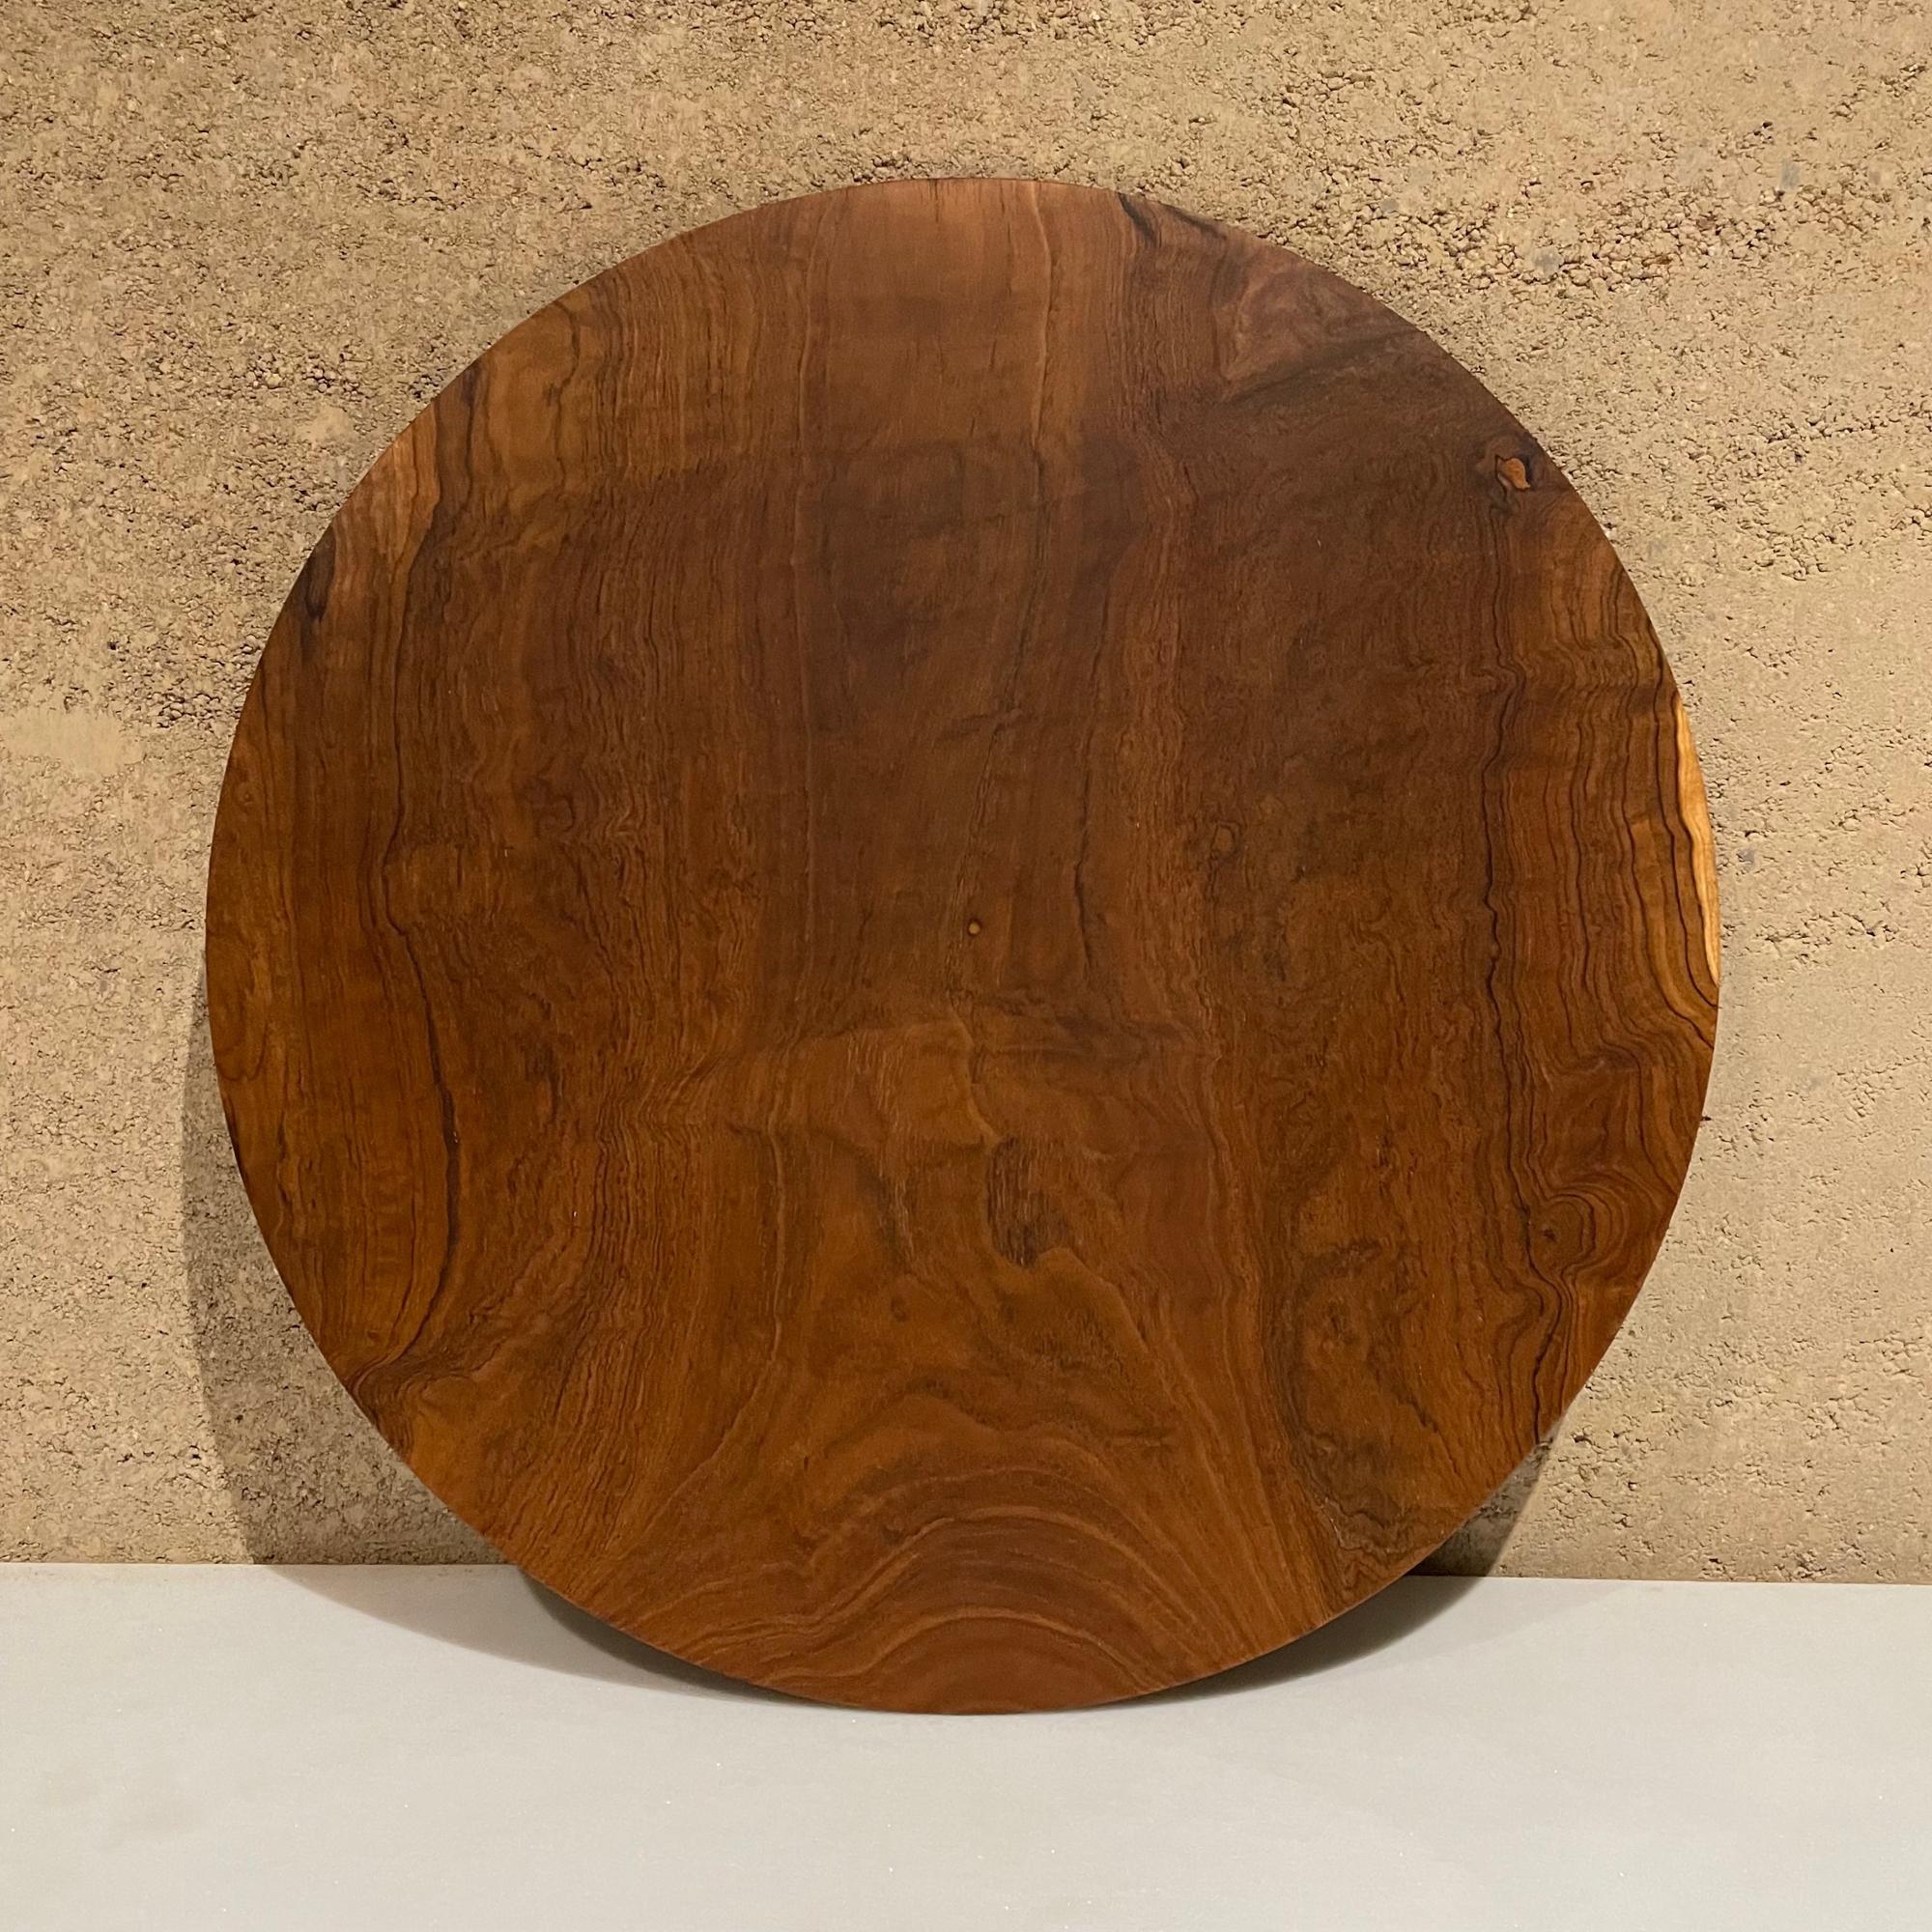 Exotic rosewood plate
Sculpturally modern plate Rude Osolnik Style in swirling exotic rosewood beautiful grain 1960s
15.5 diameter x .63 tall inches
Unsigned. In the style of Rude Osolnik.
Original Unrestored Preowned Vintage condition. Used by